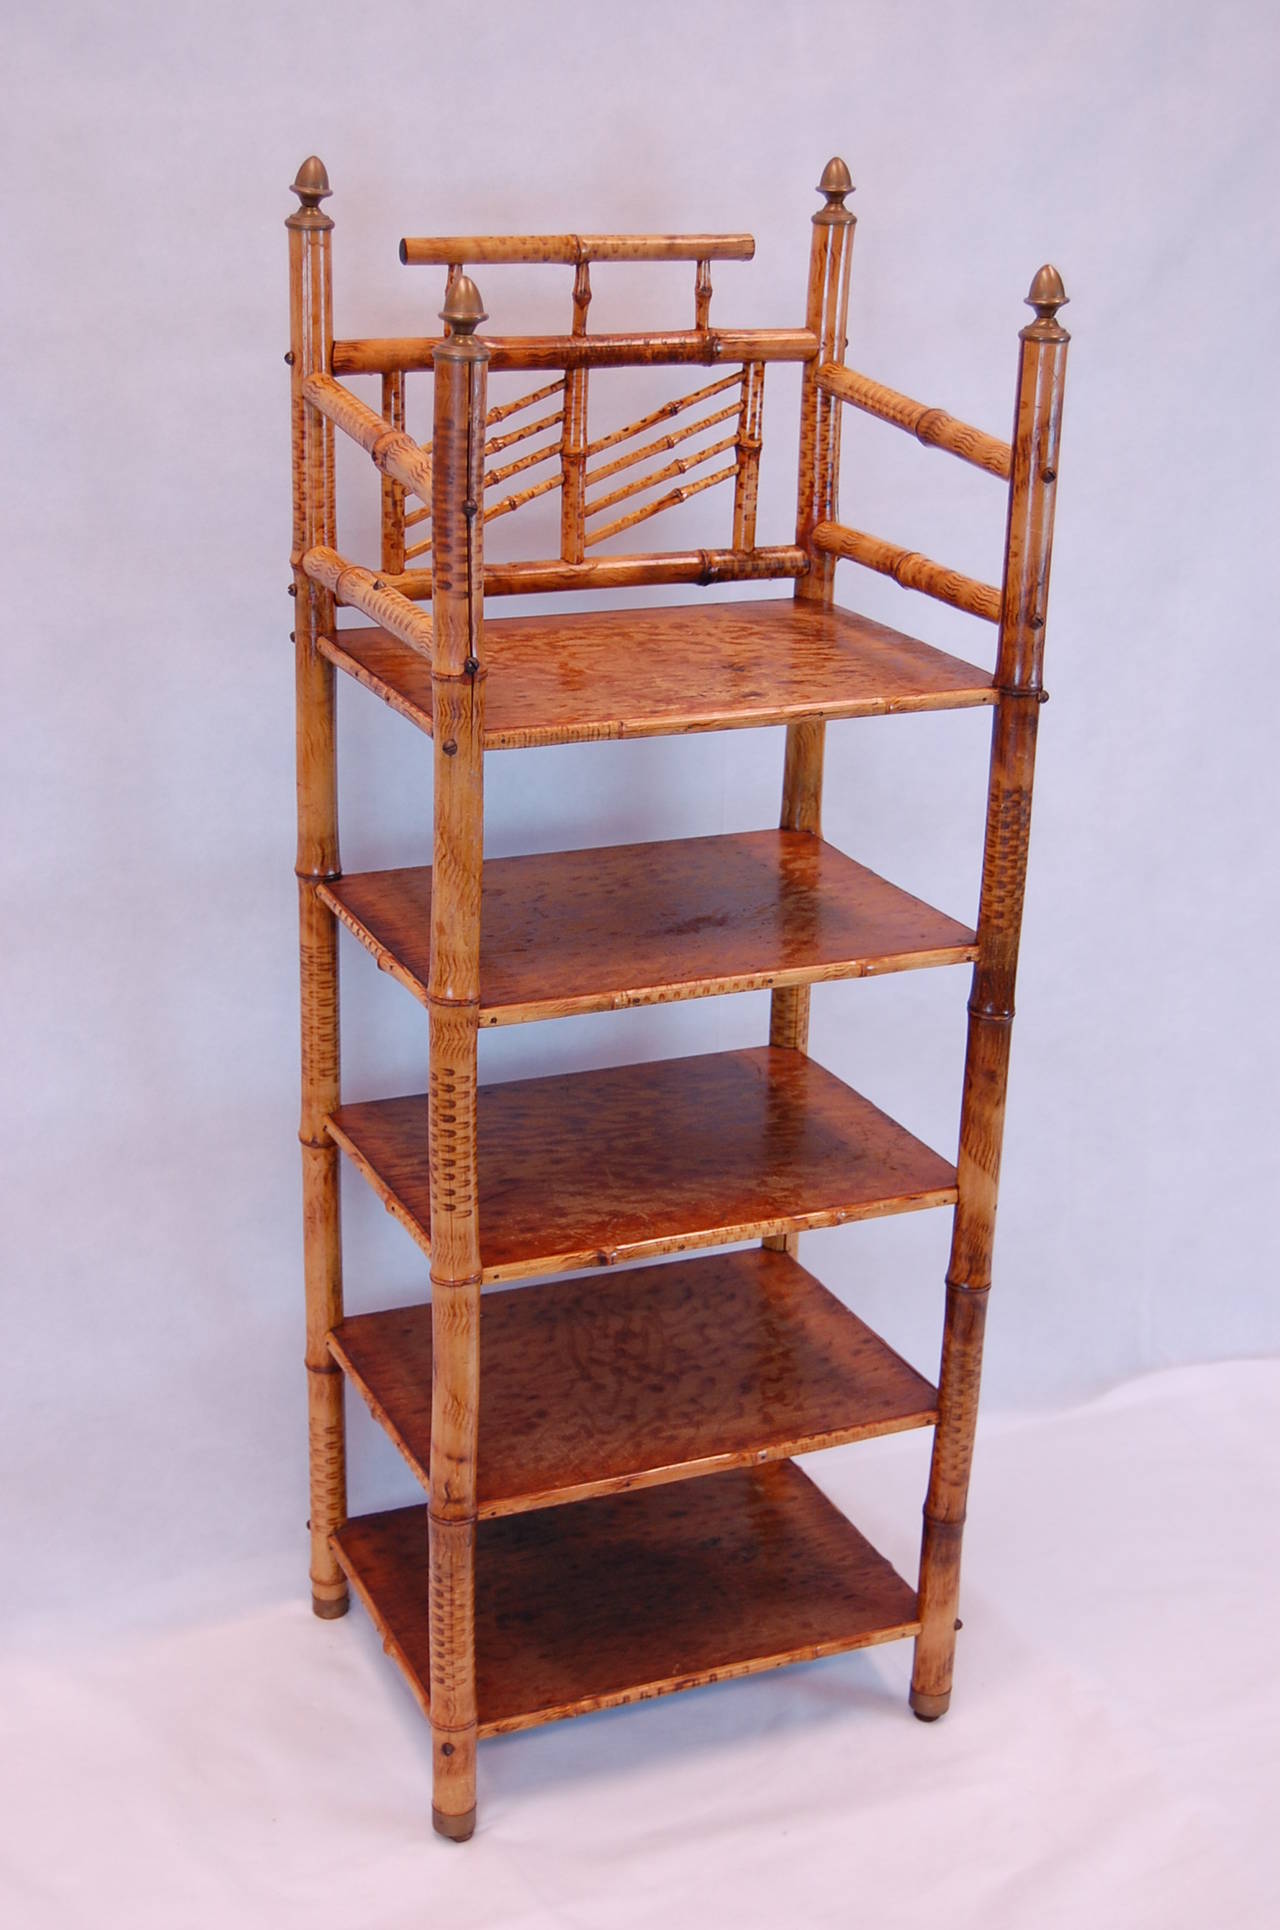 Faux finished bamboo stand with 5 shelves and brass finials atop each leg as well as brass caps at the base of each leg. Reasonably tight frame.